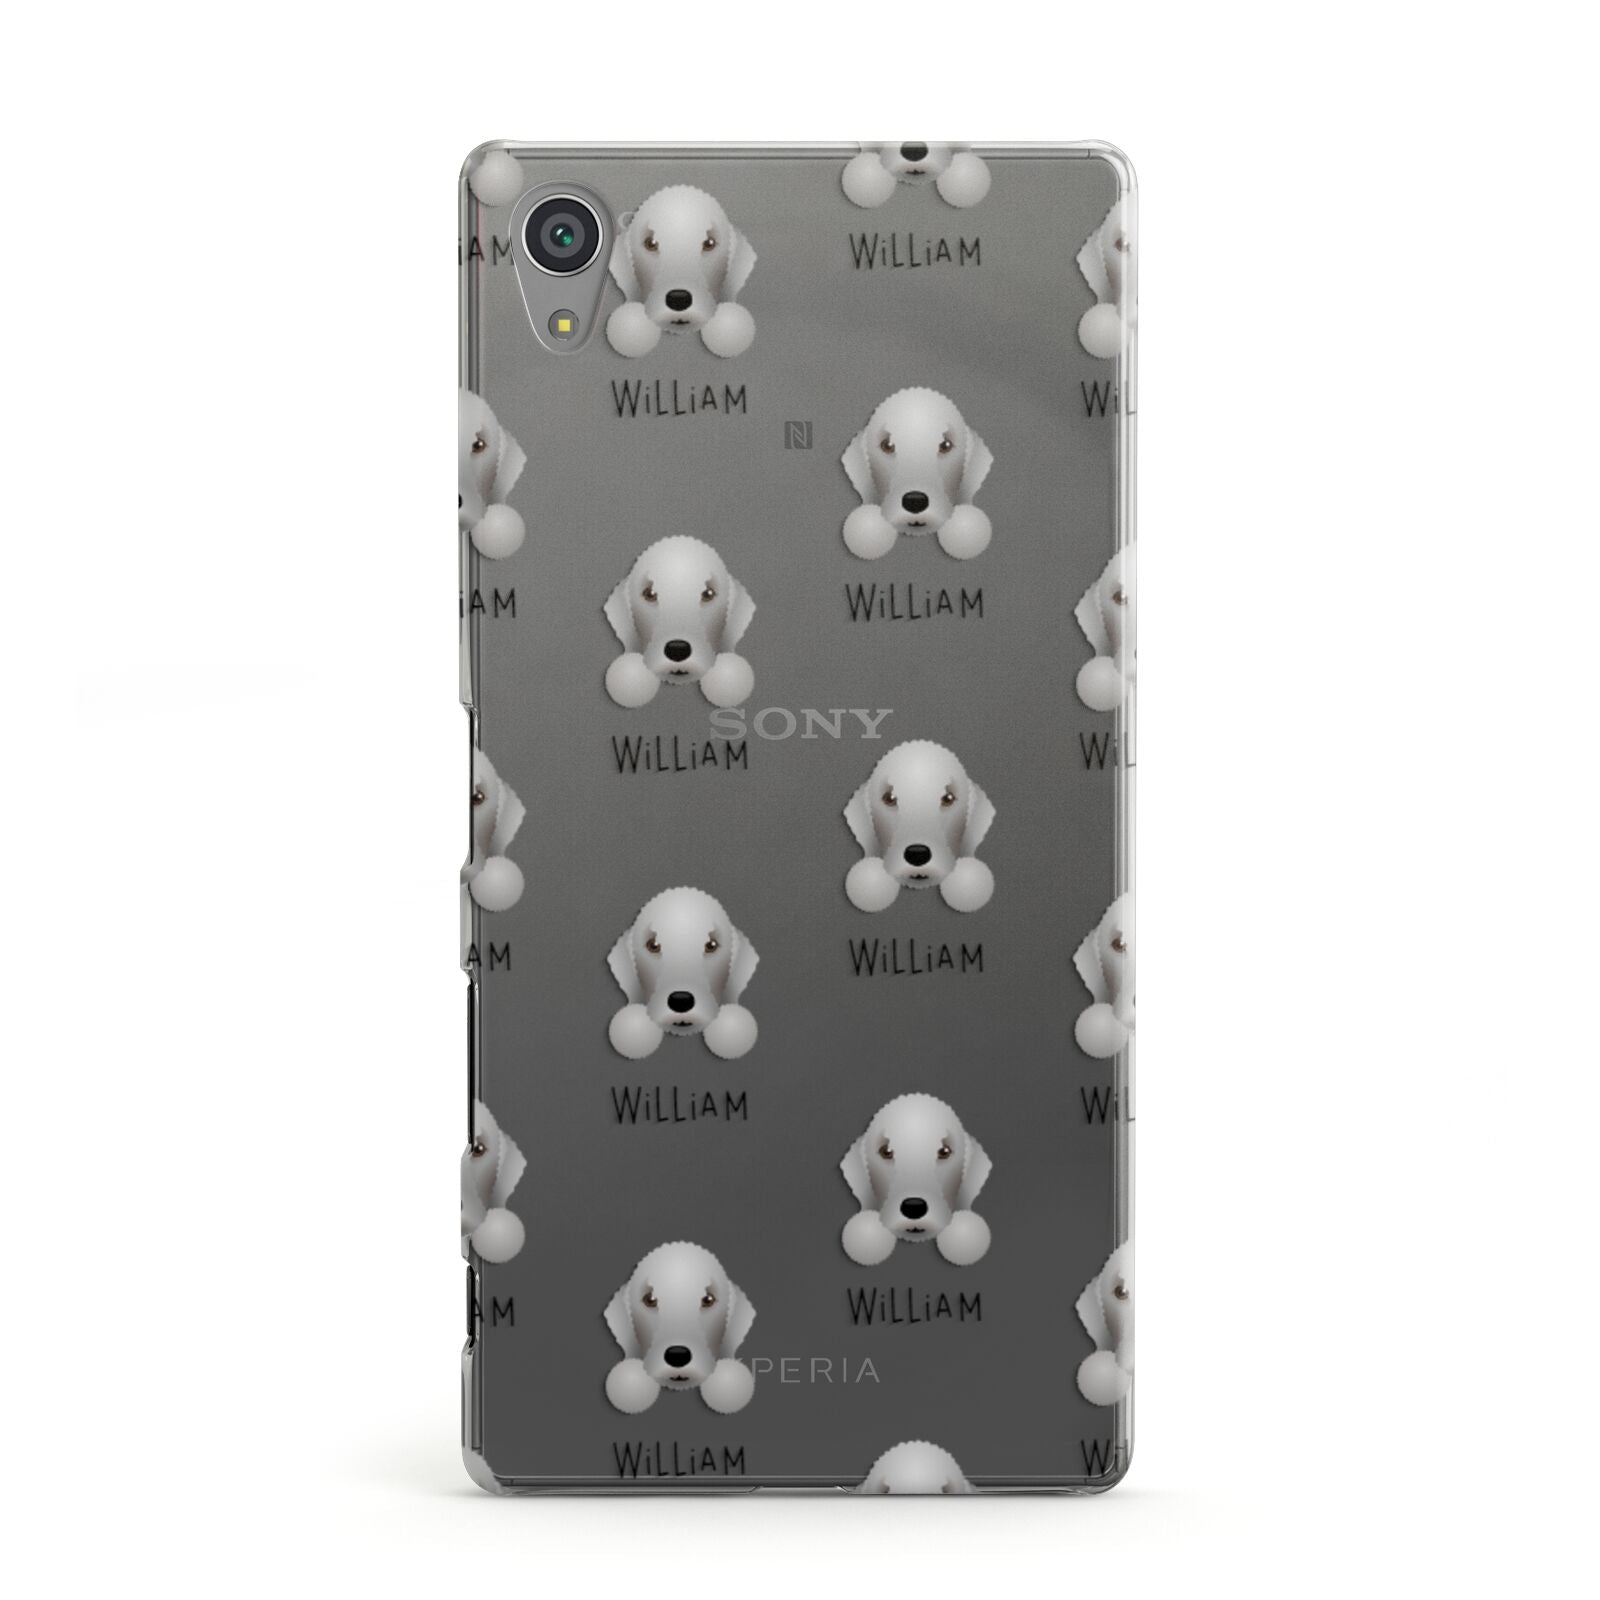 Bedlington Terrier Icon with Name Sony Xperia Case